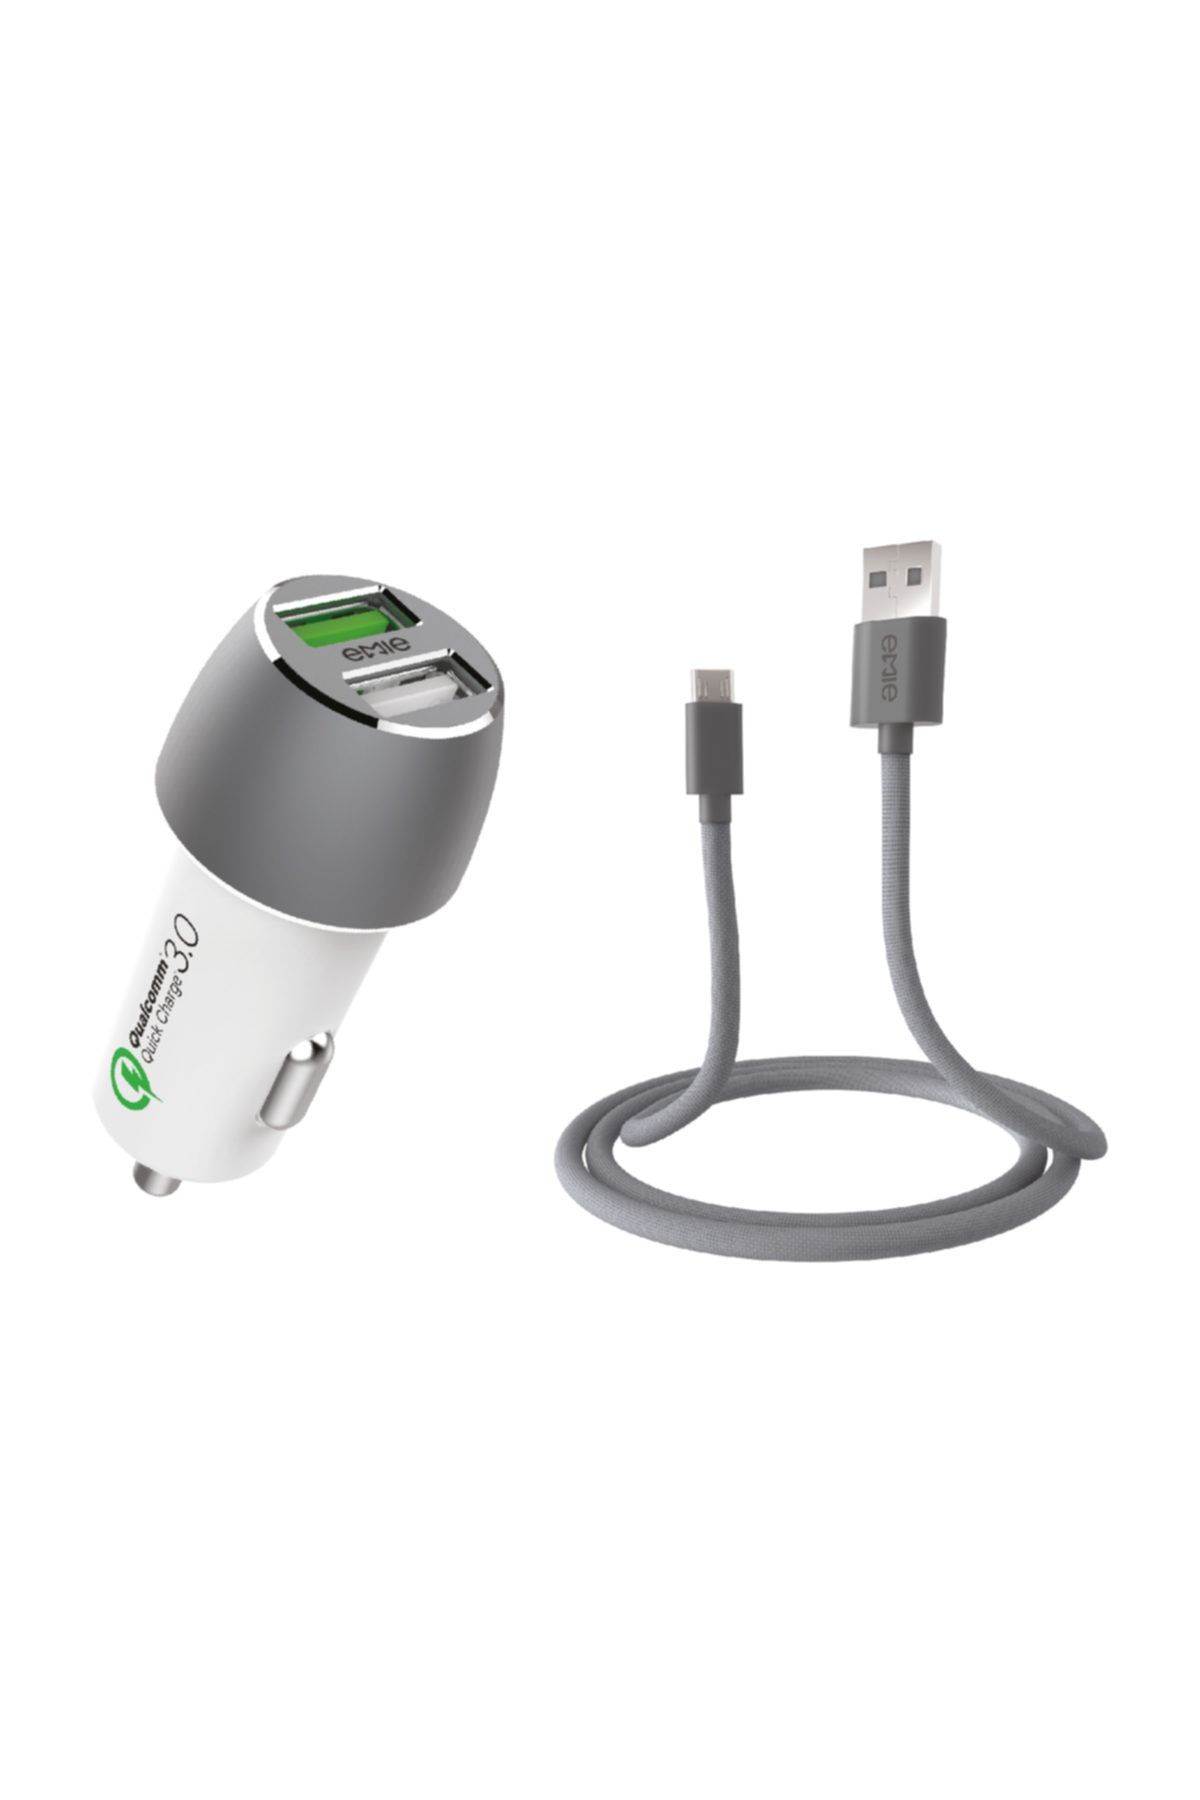 Emie Buga Car Charger Combo Pack 2 Port Car Charger - 30w - Qualcomm 3.0 + 1m Micro Usb Kablo